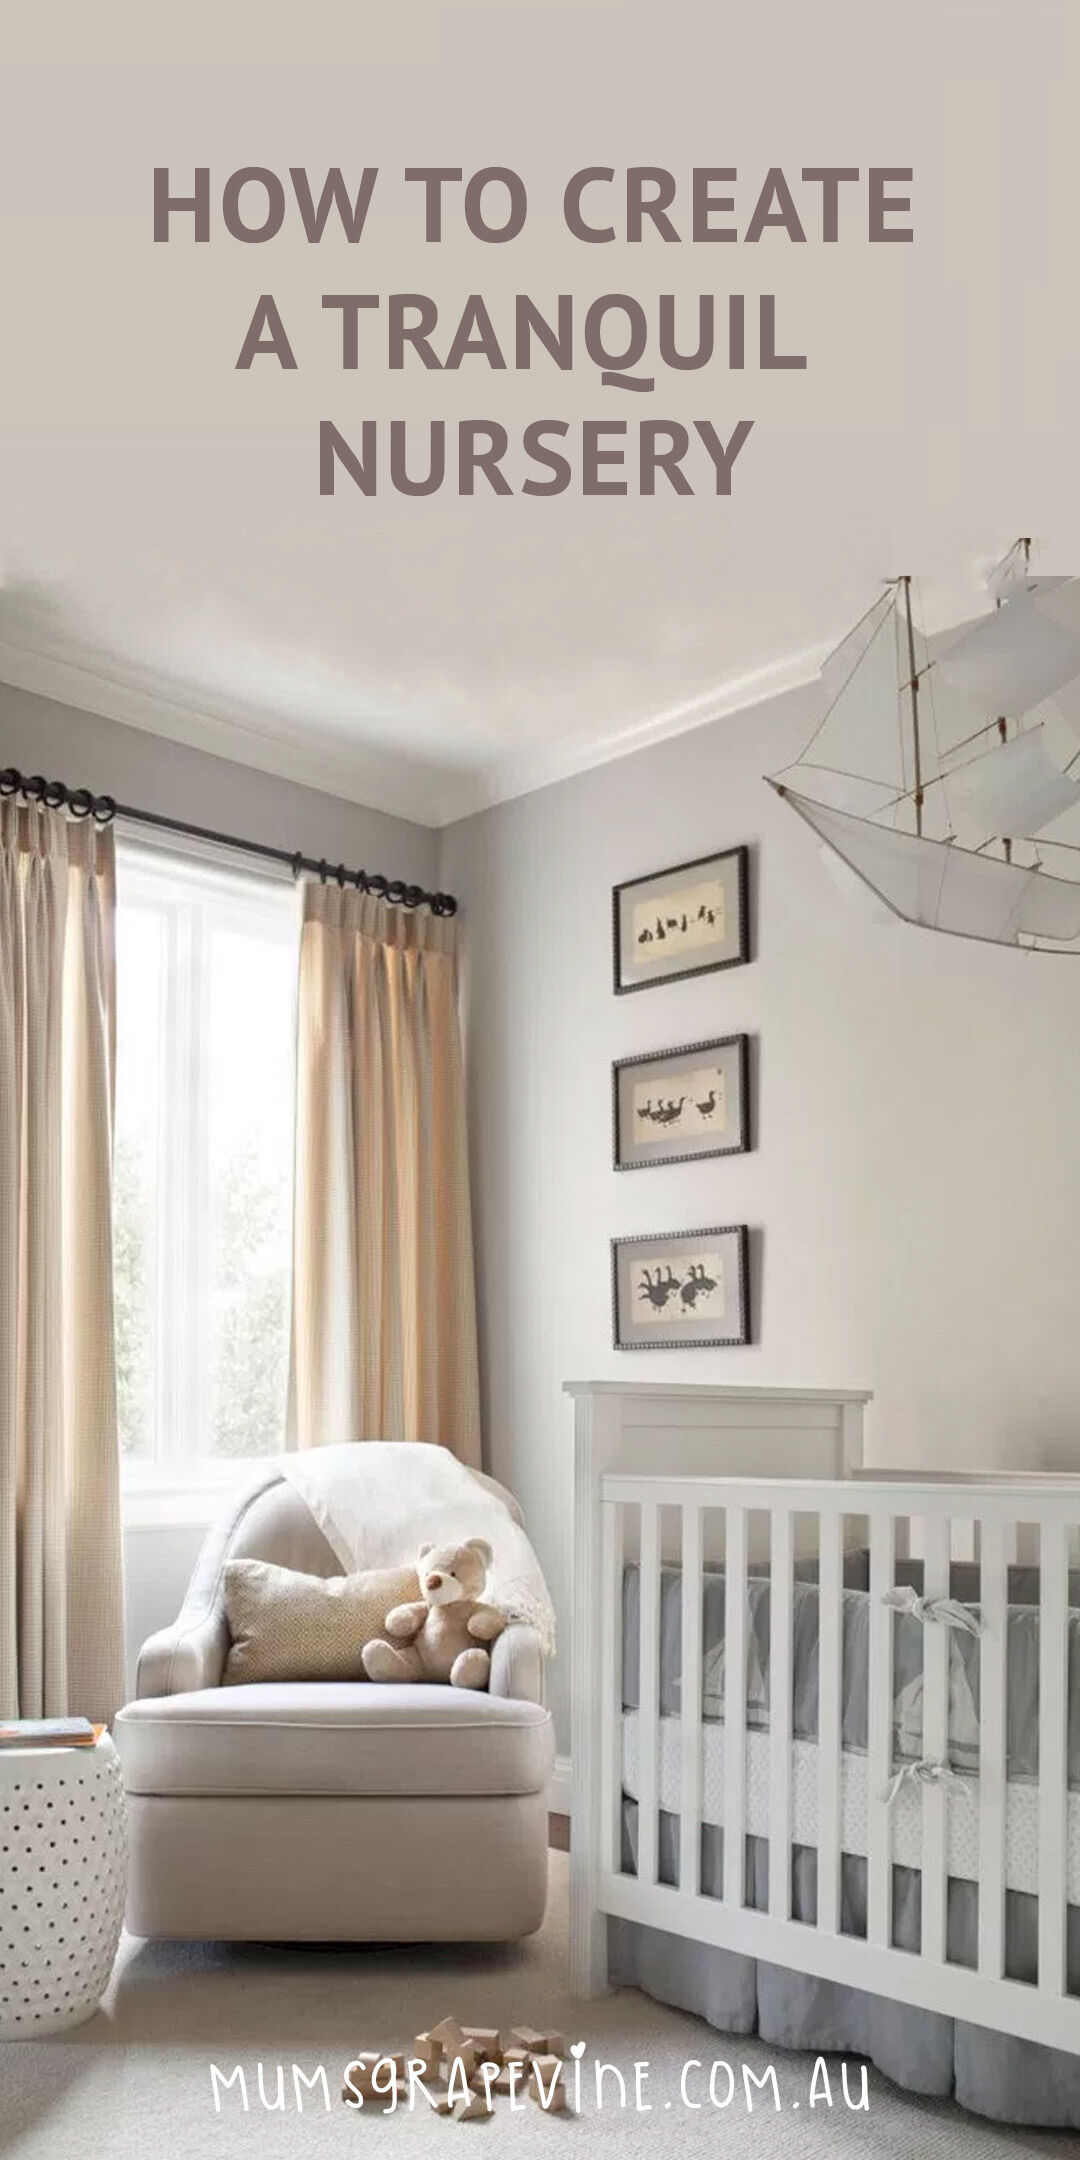 How to create a tranquil baby nursery